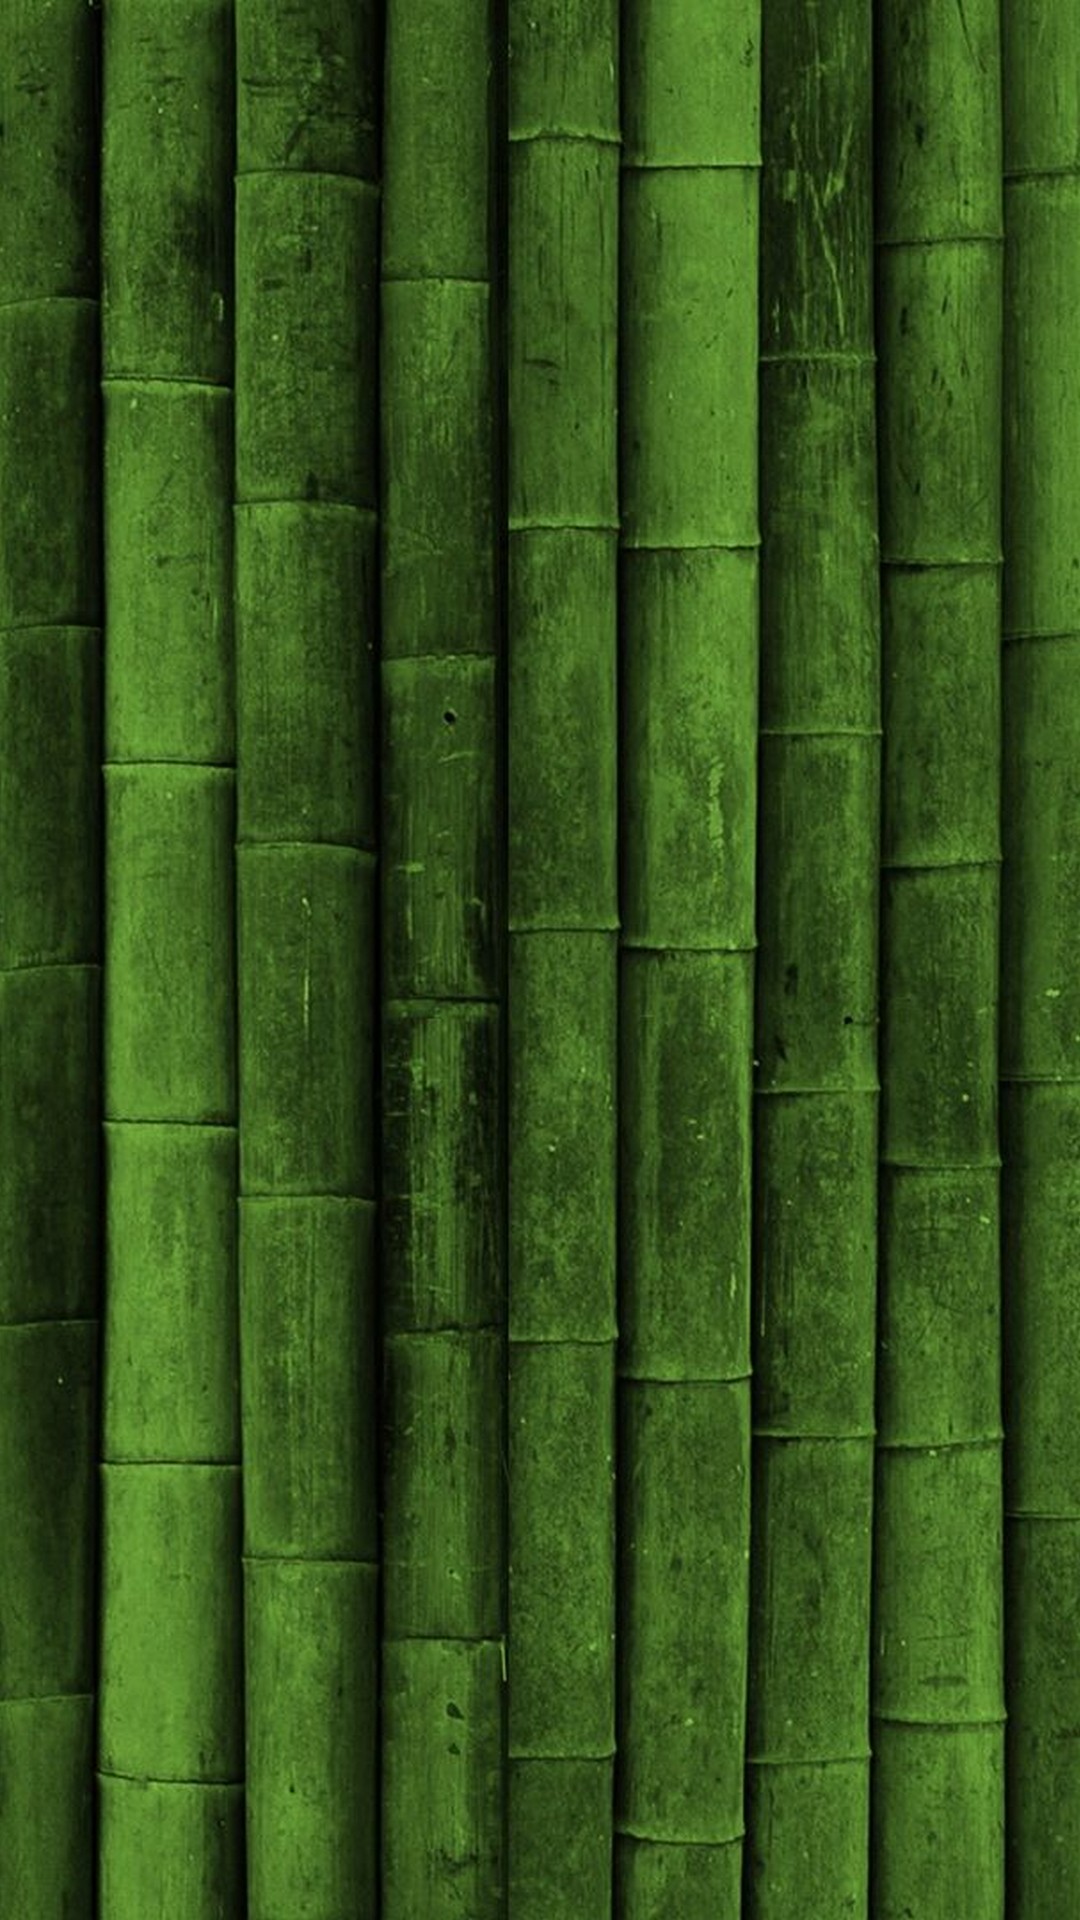 iPhone Wallpaper Dark Green with resolution 1080X1920 pixel. You can make this wallpaper for your iPhone 5, 6, 7, 8, X backgrounds, Mobile Screensaver, or iPad Lock Screen